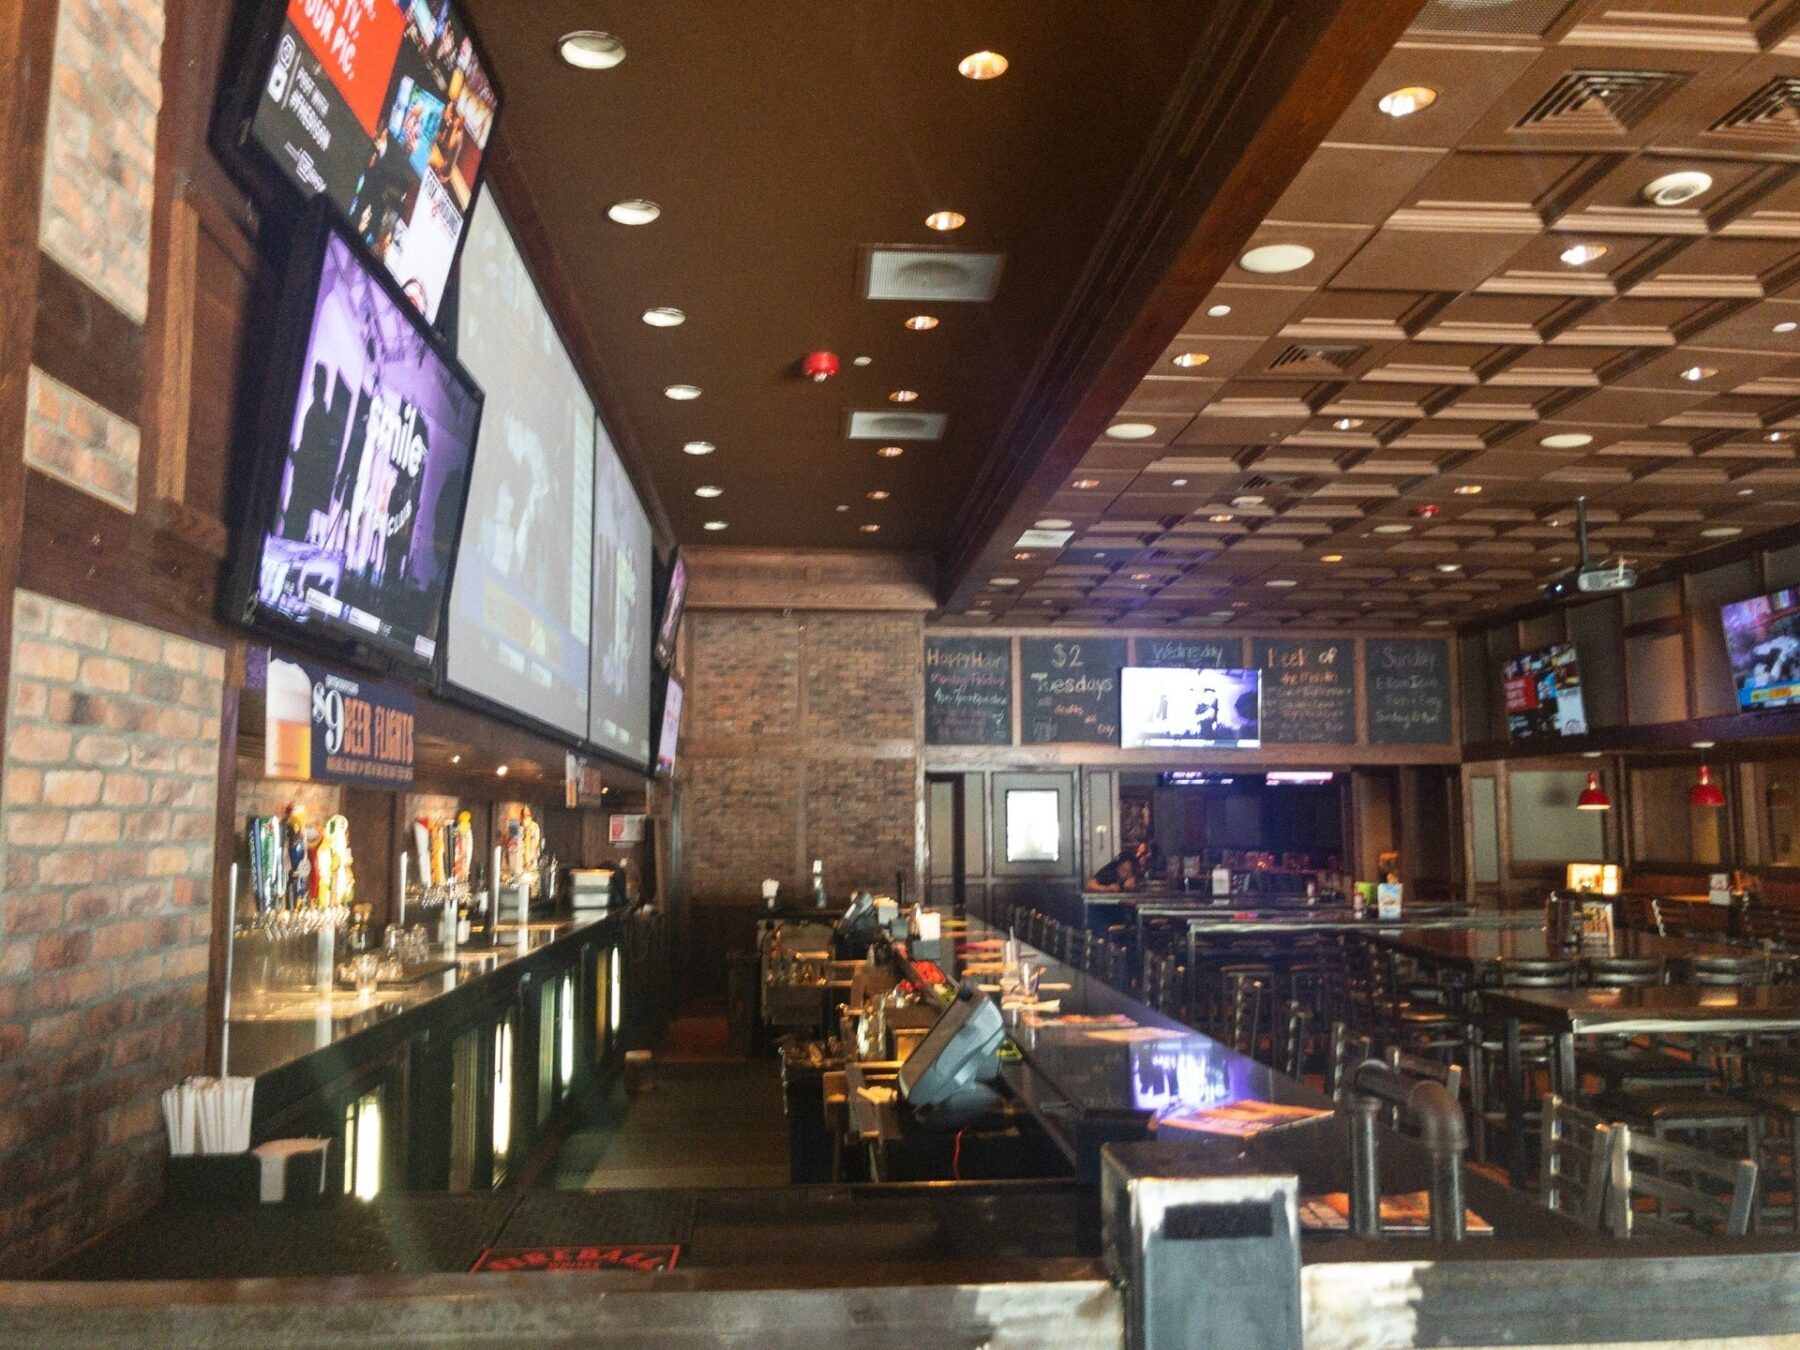 Checked in at Fox & Hound Sports Tavern